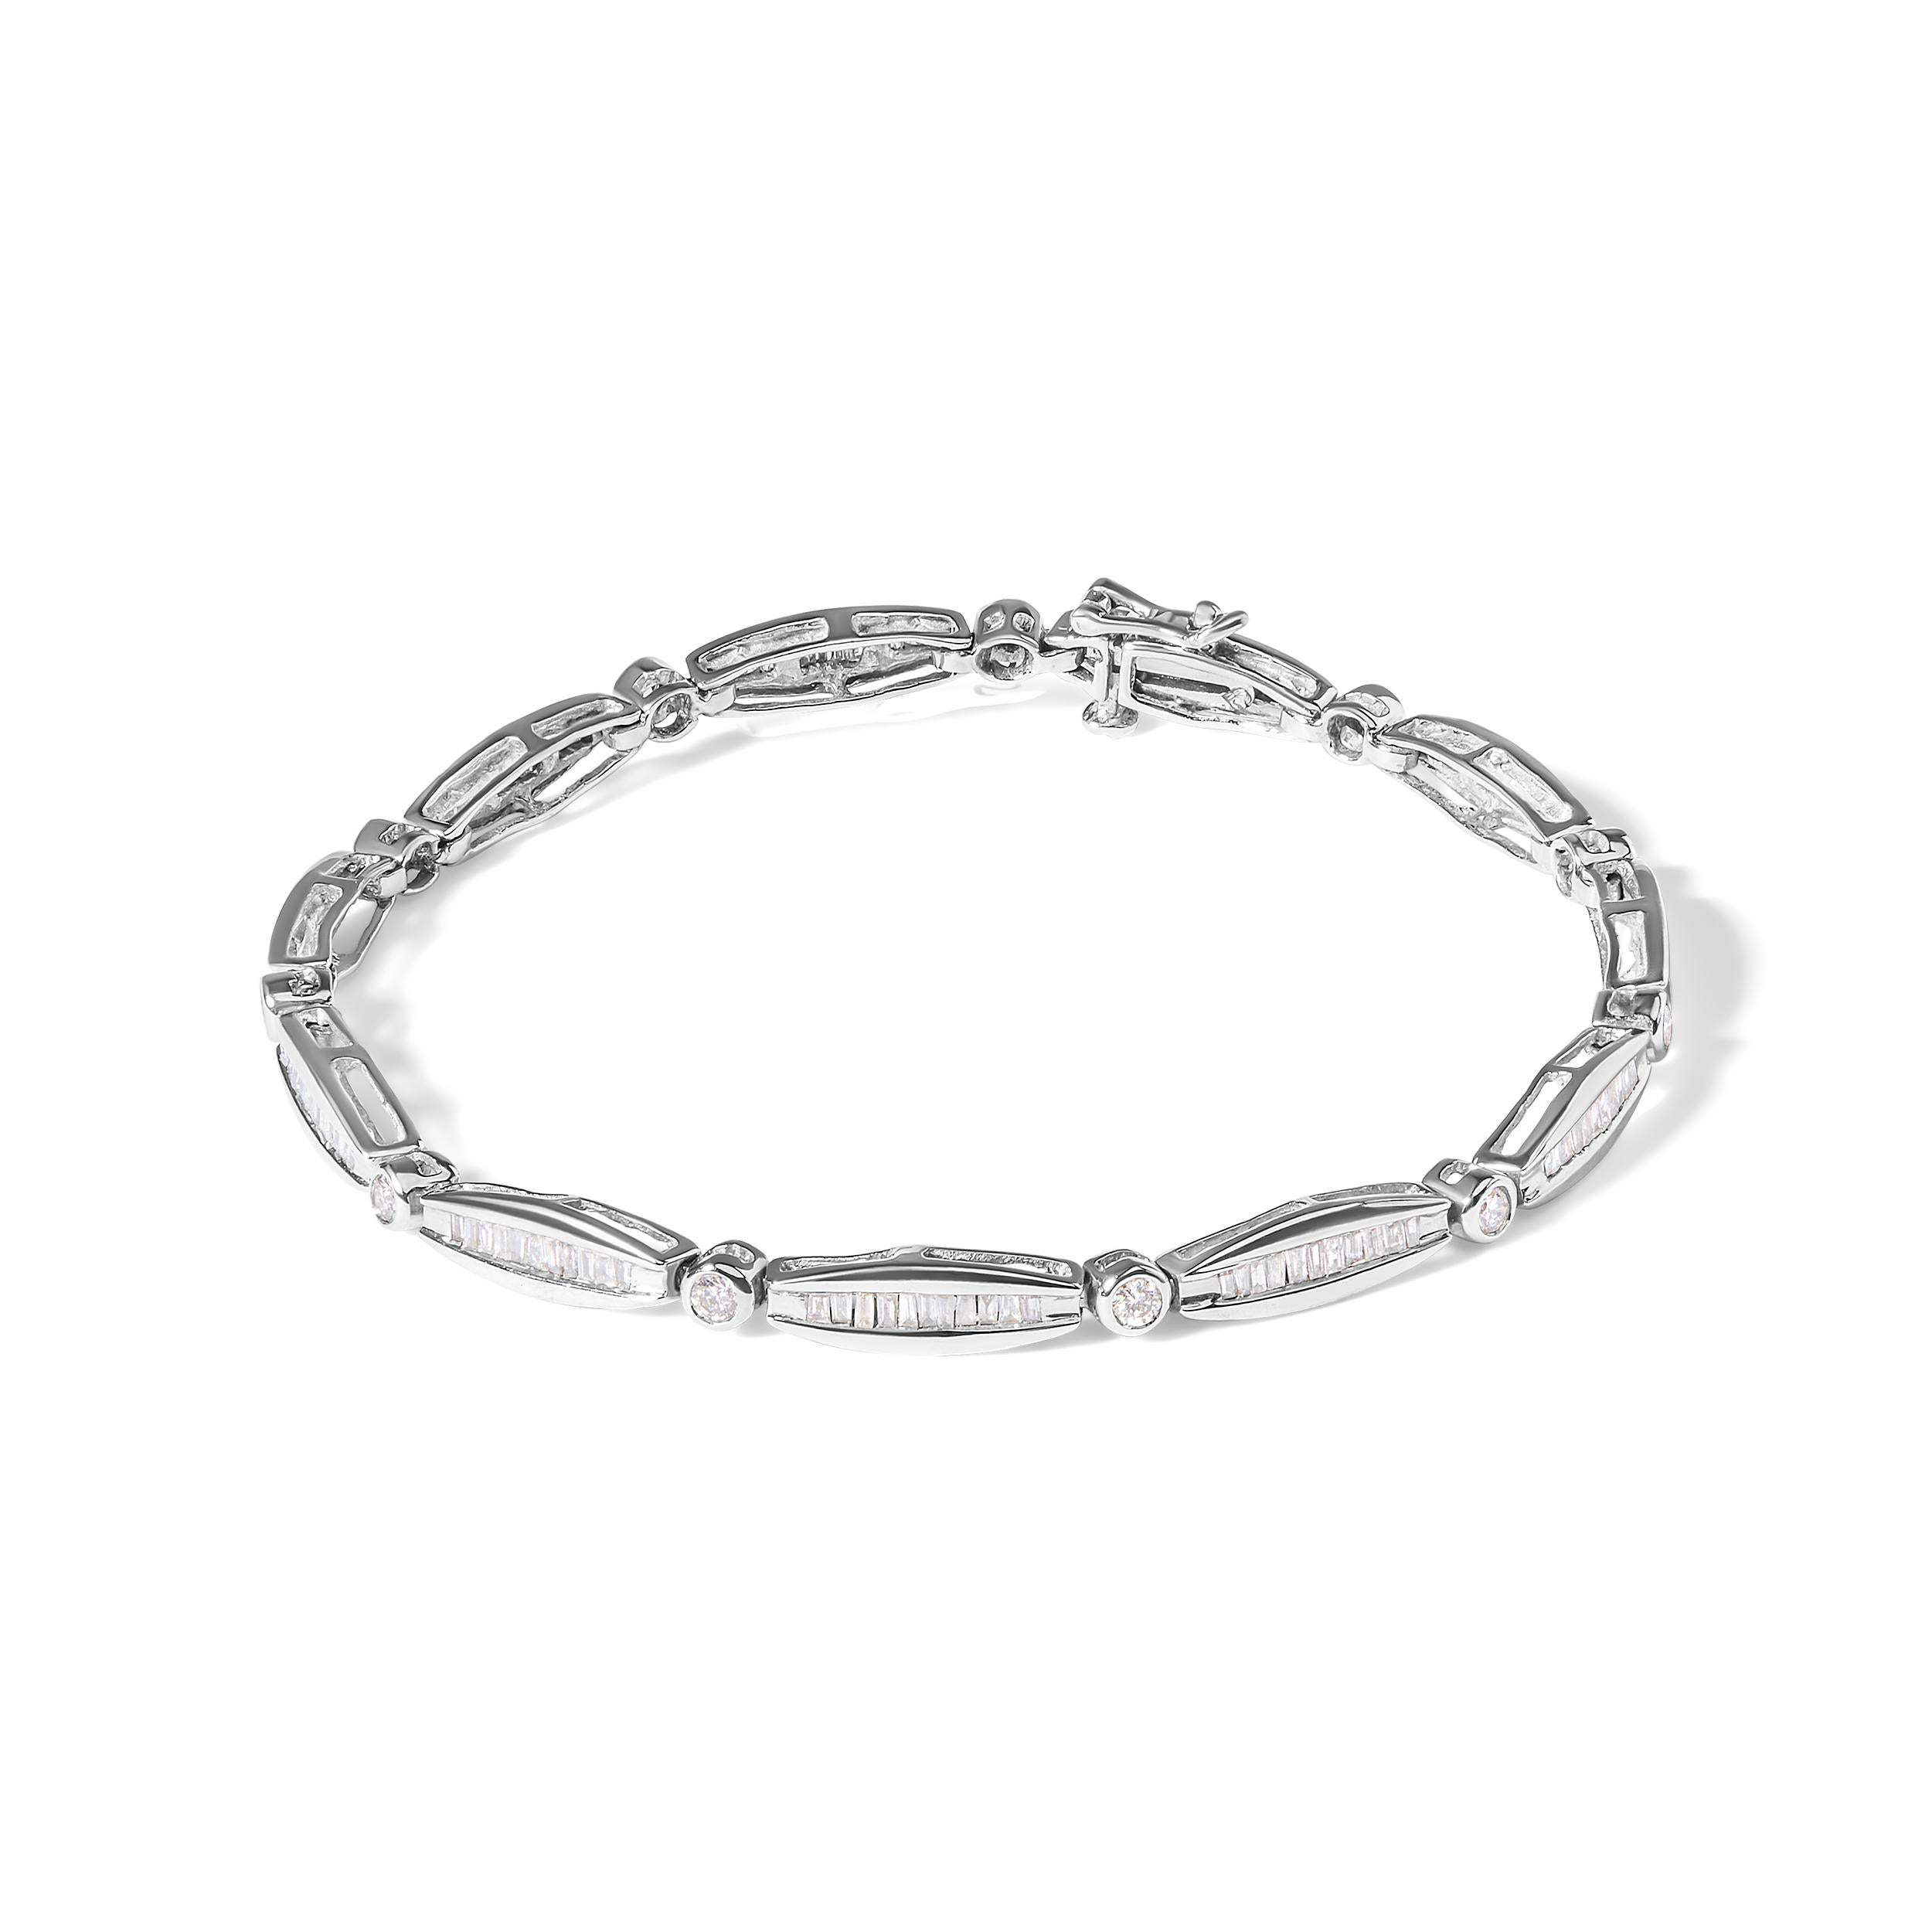 Elegant and timeless, this gorgeous 14K white gold tennis bracelet features 1 1/2 carat total weight of diamonds with a whopping 121 stones in all. The tennis bracelet features alternating round links with bezel set, brilliant cut diamonds and